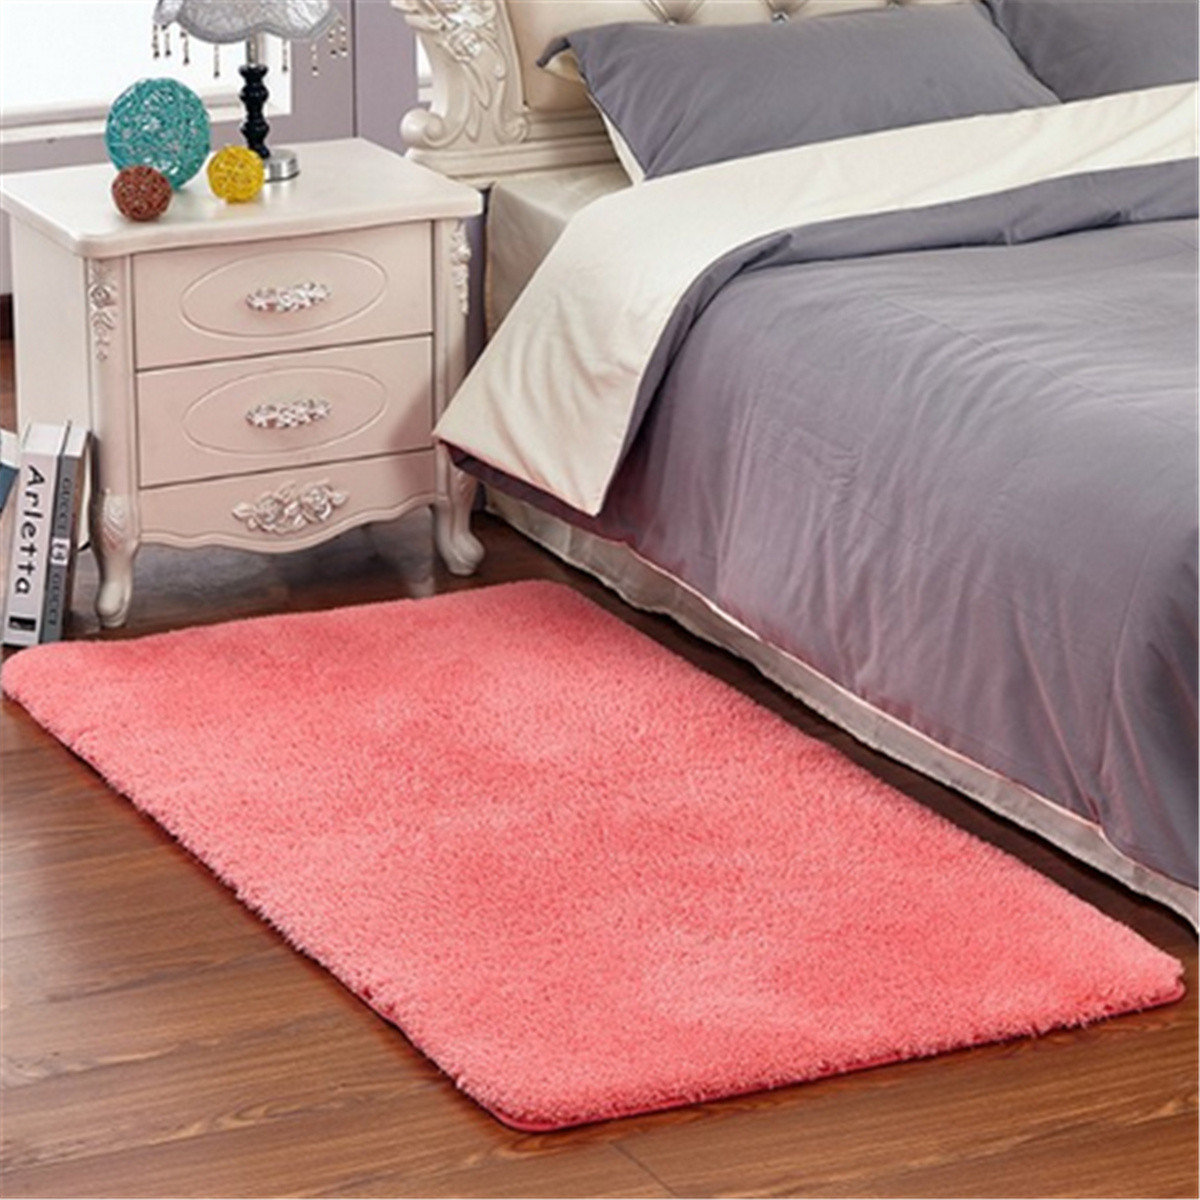 

Ultra Soft Fluffy Area Rugs for Bedroom Kids Room Plush Shaggy Nursery Rug Furry Throw Carpets for College Dorm Fuzzy Ru, Green fruit;blue;pink;gray;coffee;red & rose;rice white;khaki;purple;green;red wine;red;black